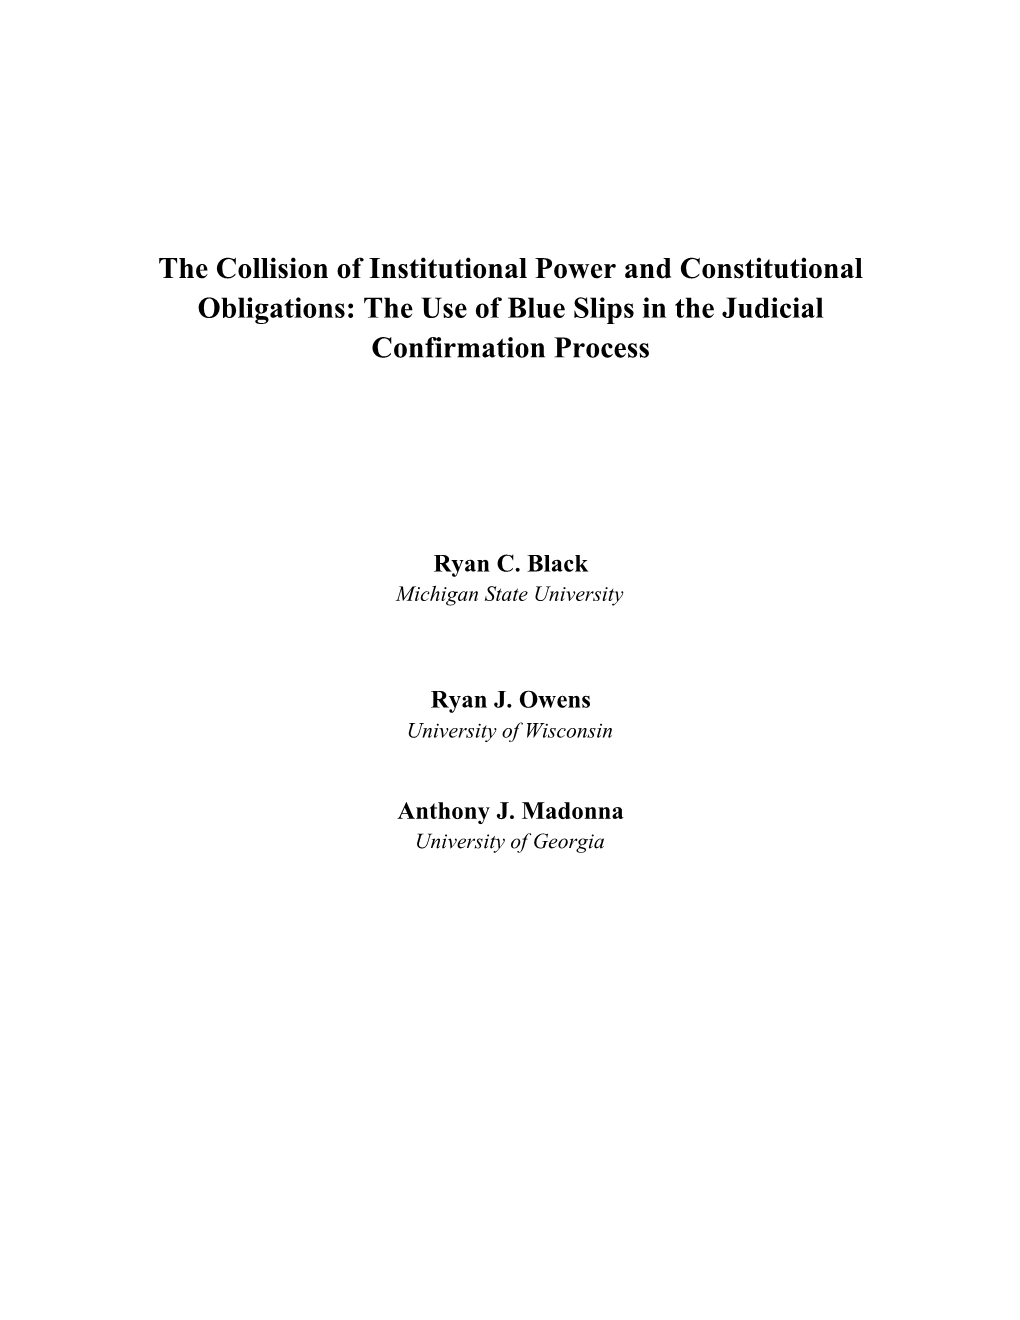 The Collision of Institutional Power and Constitutional Obligations: the Use of Blue Slips